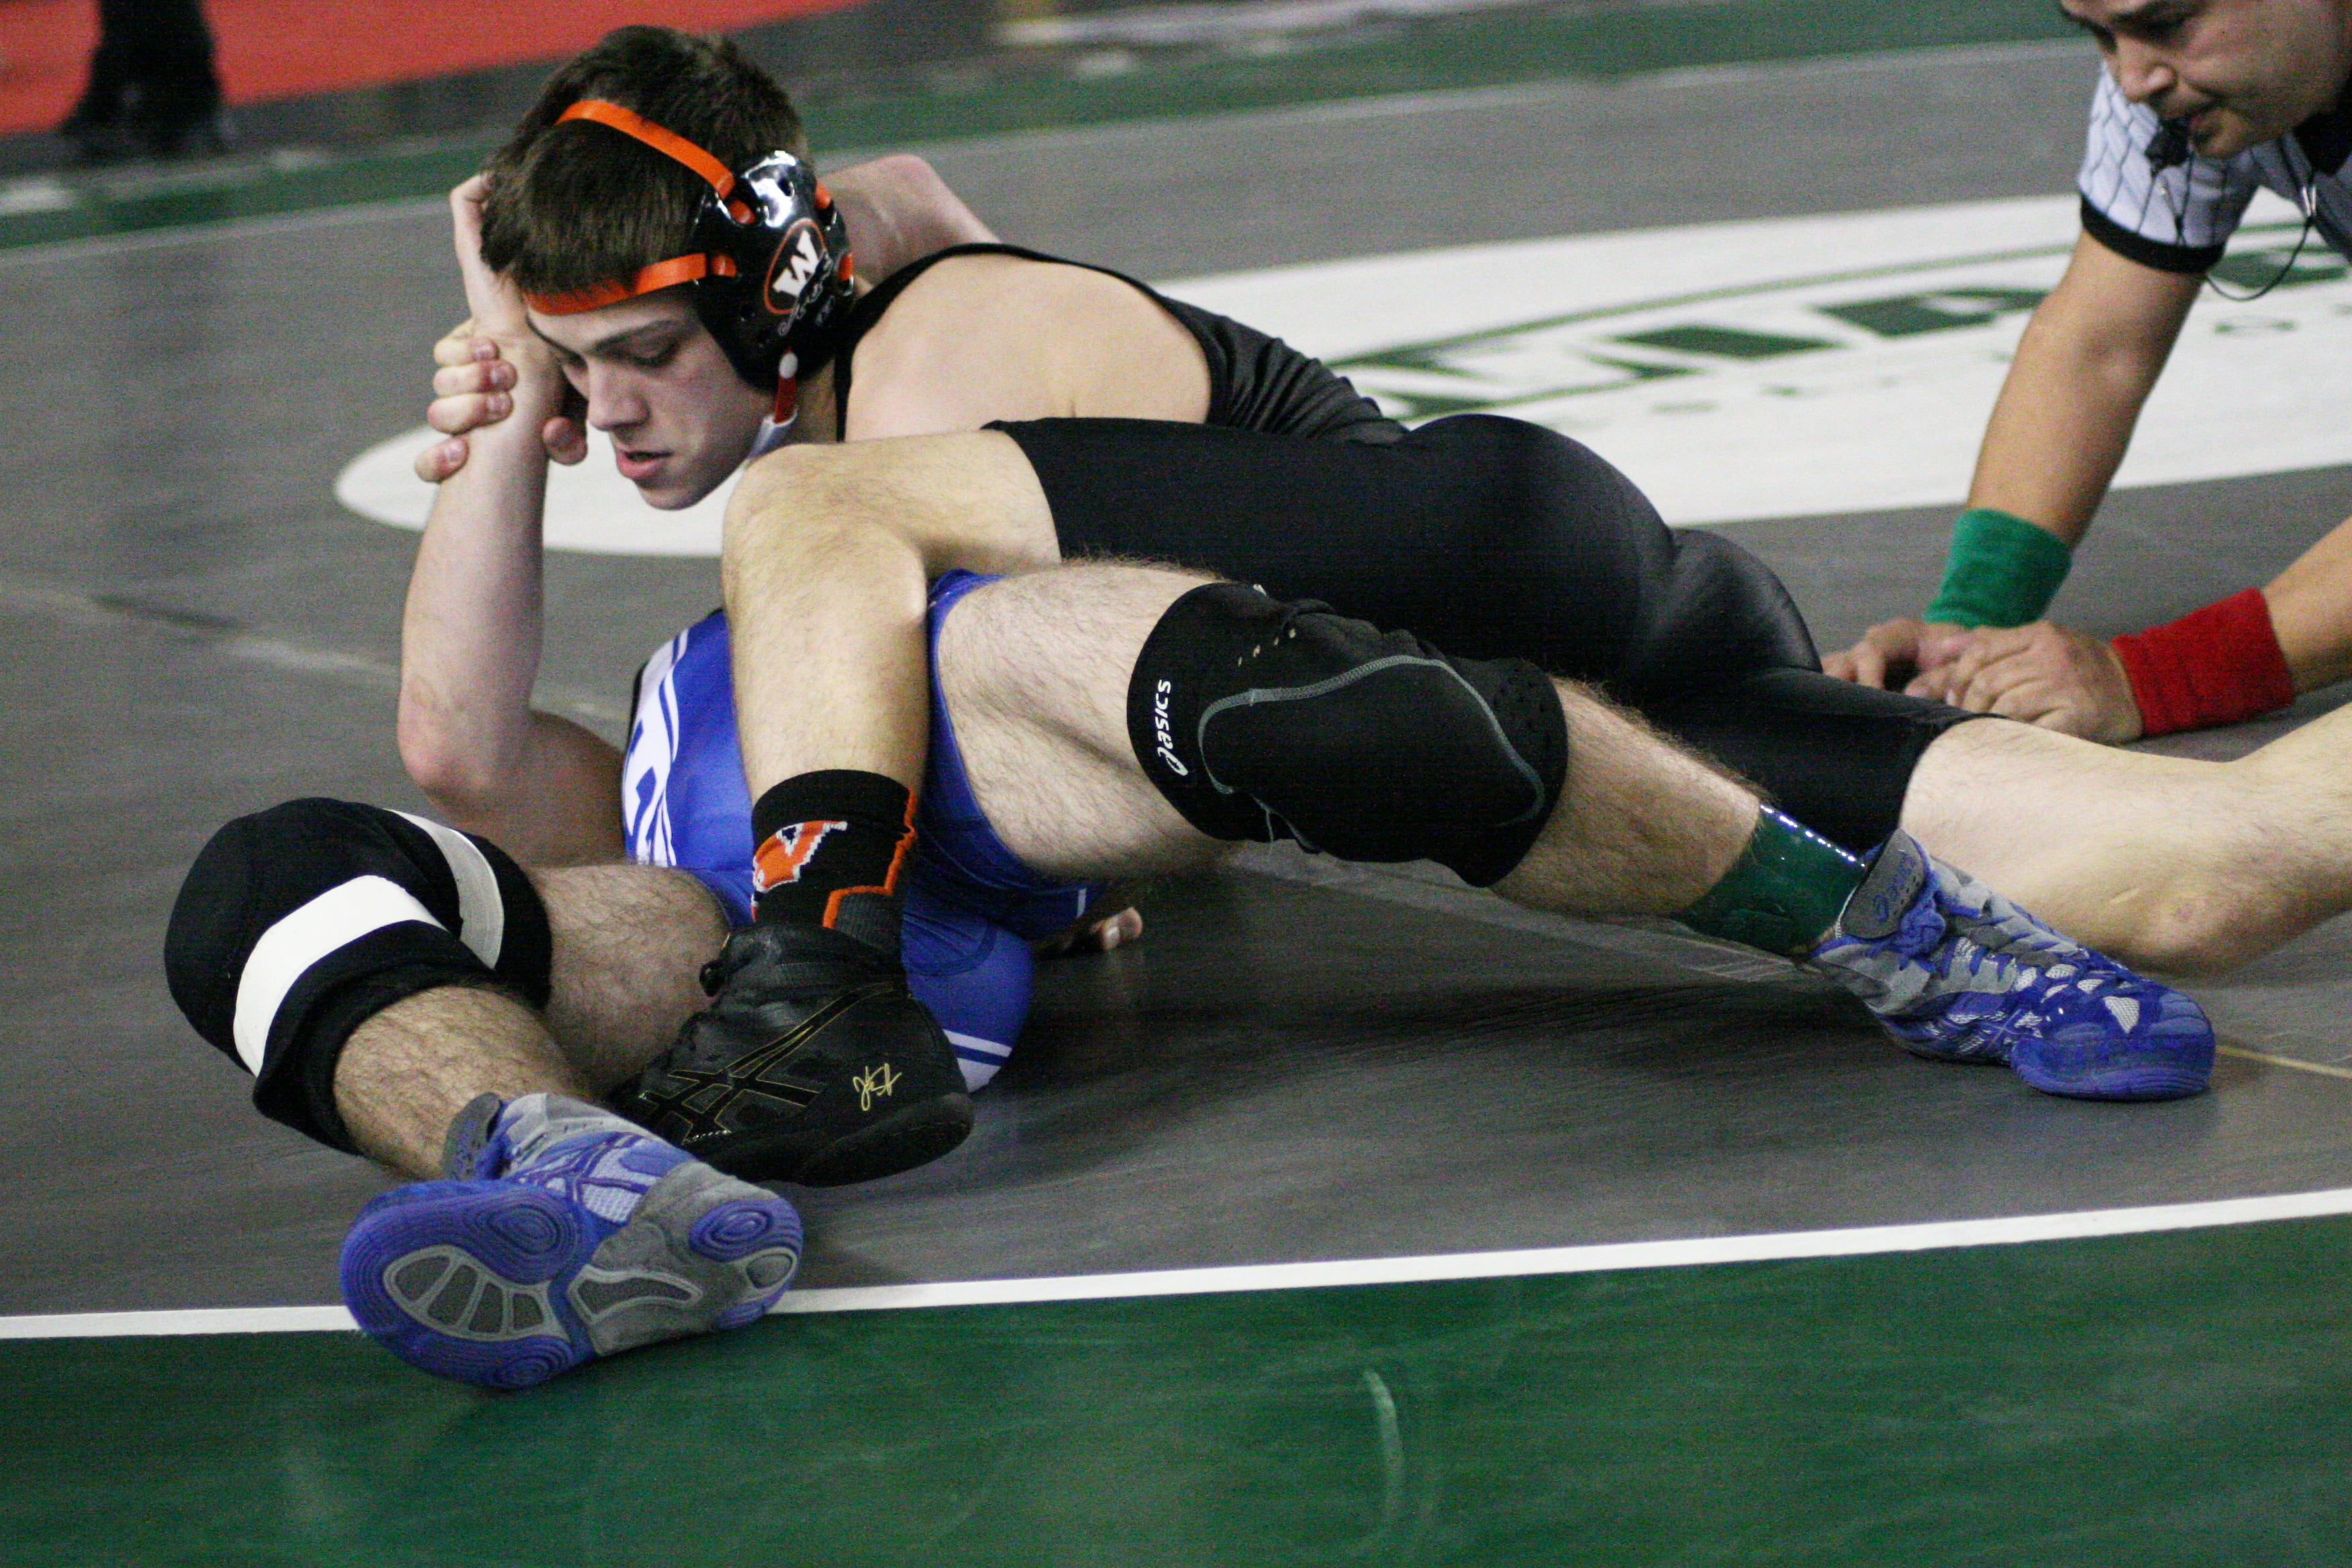 Zach Oster sticks Adam Adkinson to the mat during the 2A 120-pound state semifinals. This move gave the Washougal High School senior the confidence to beat Adkinson in overtime.